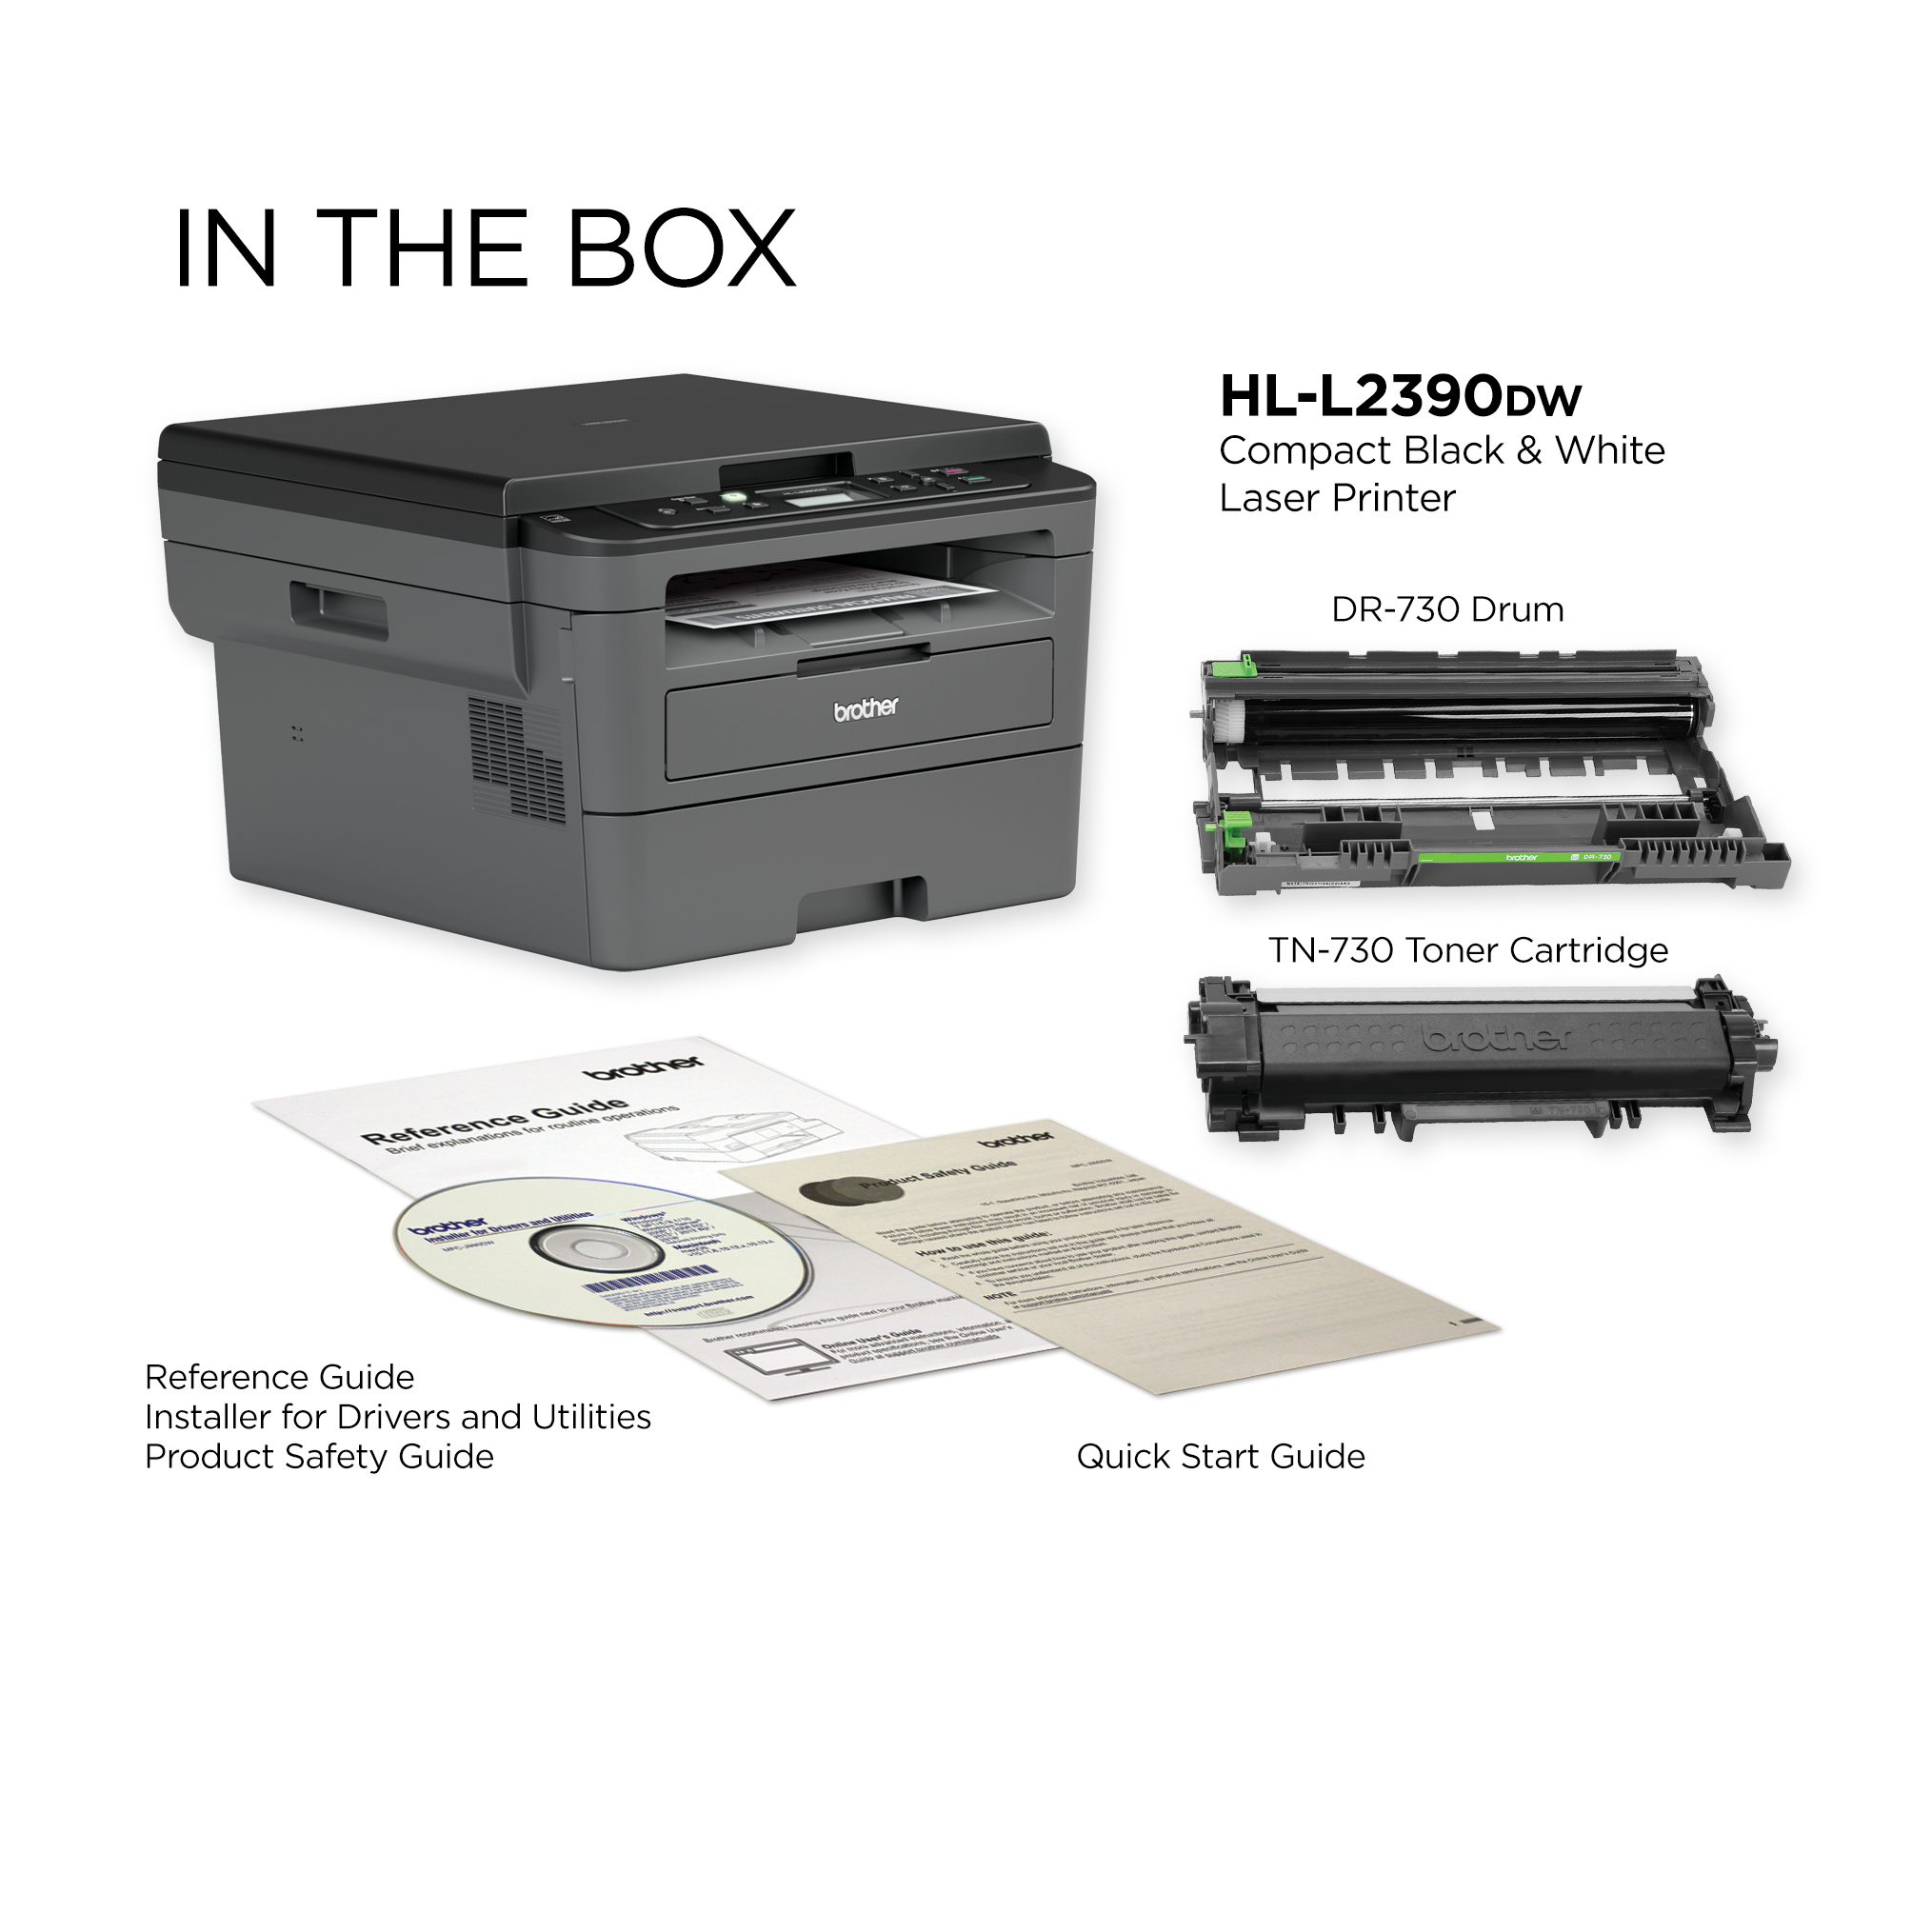 Brother HL-L2390DW Monochrome Laser Printer with Flatbed Copy & Scan, Duplex Printing, Wireless - image 3 of 9